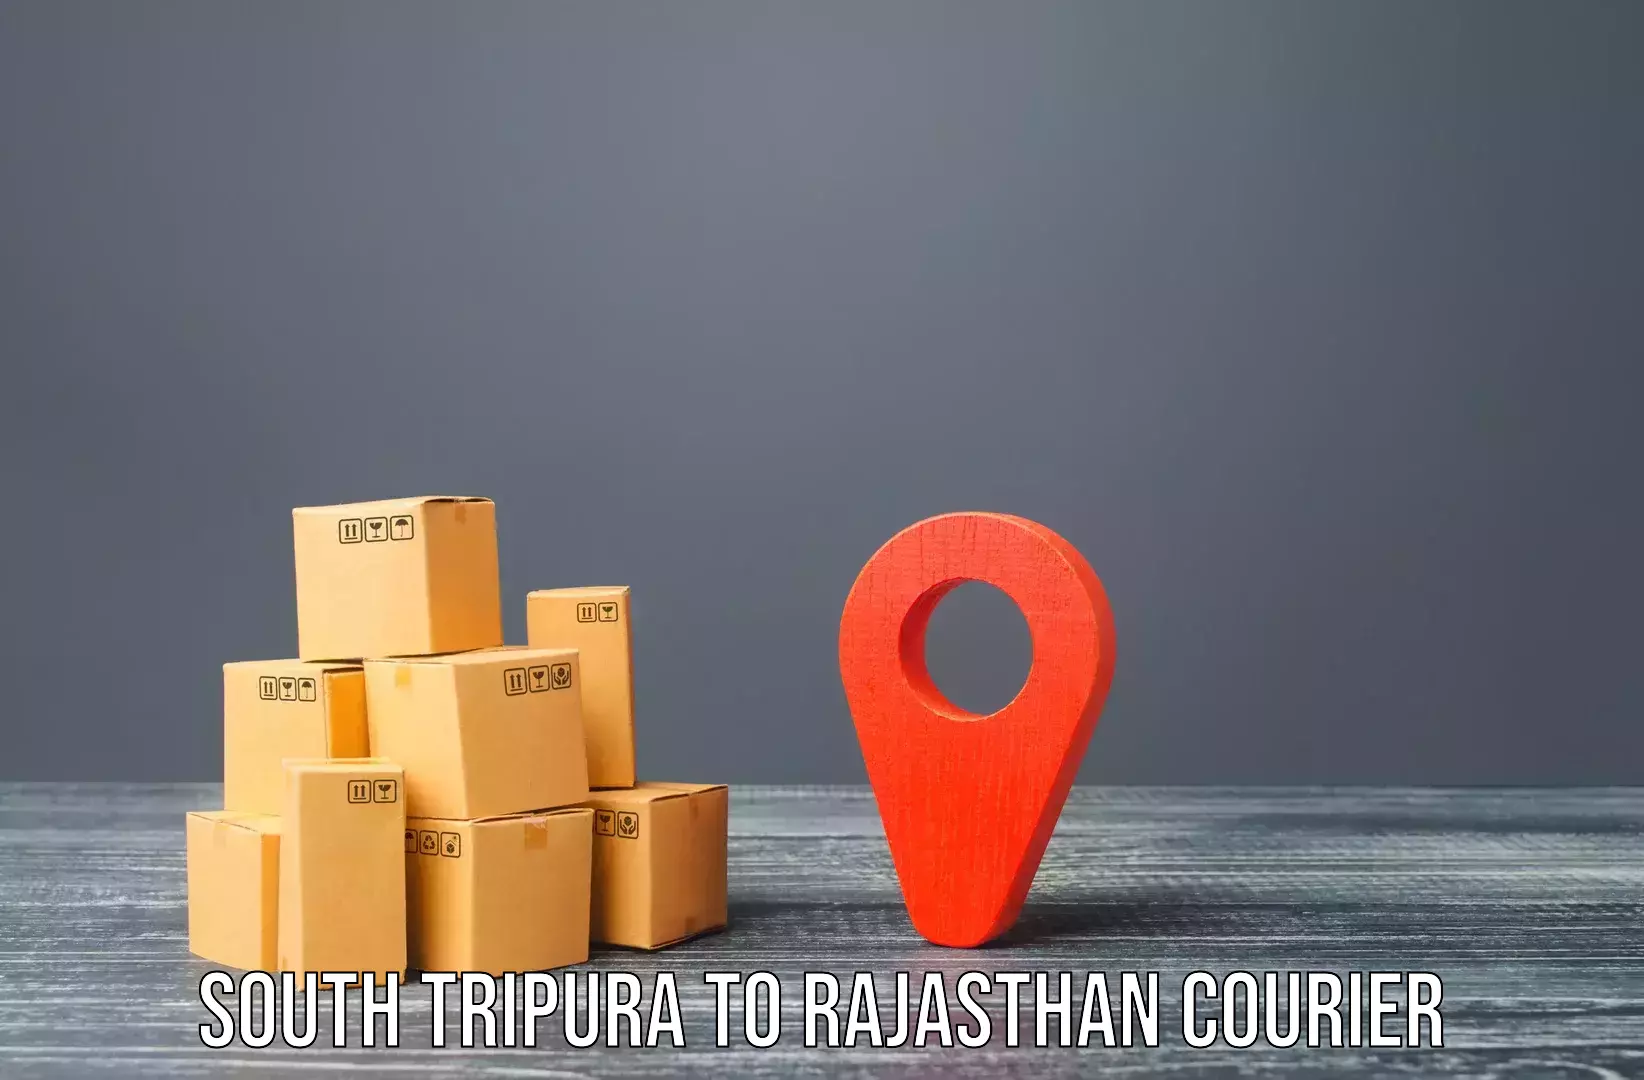 Efficient relocation services South Tripura to IIT Jodhpur